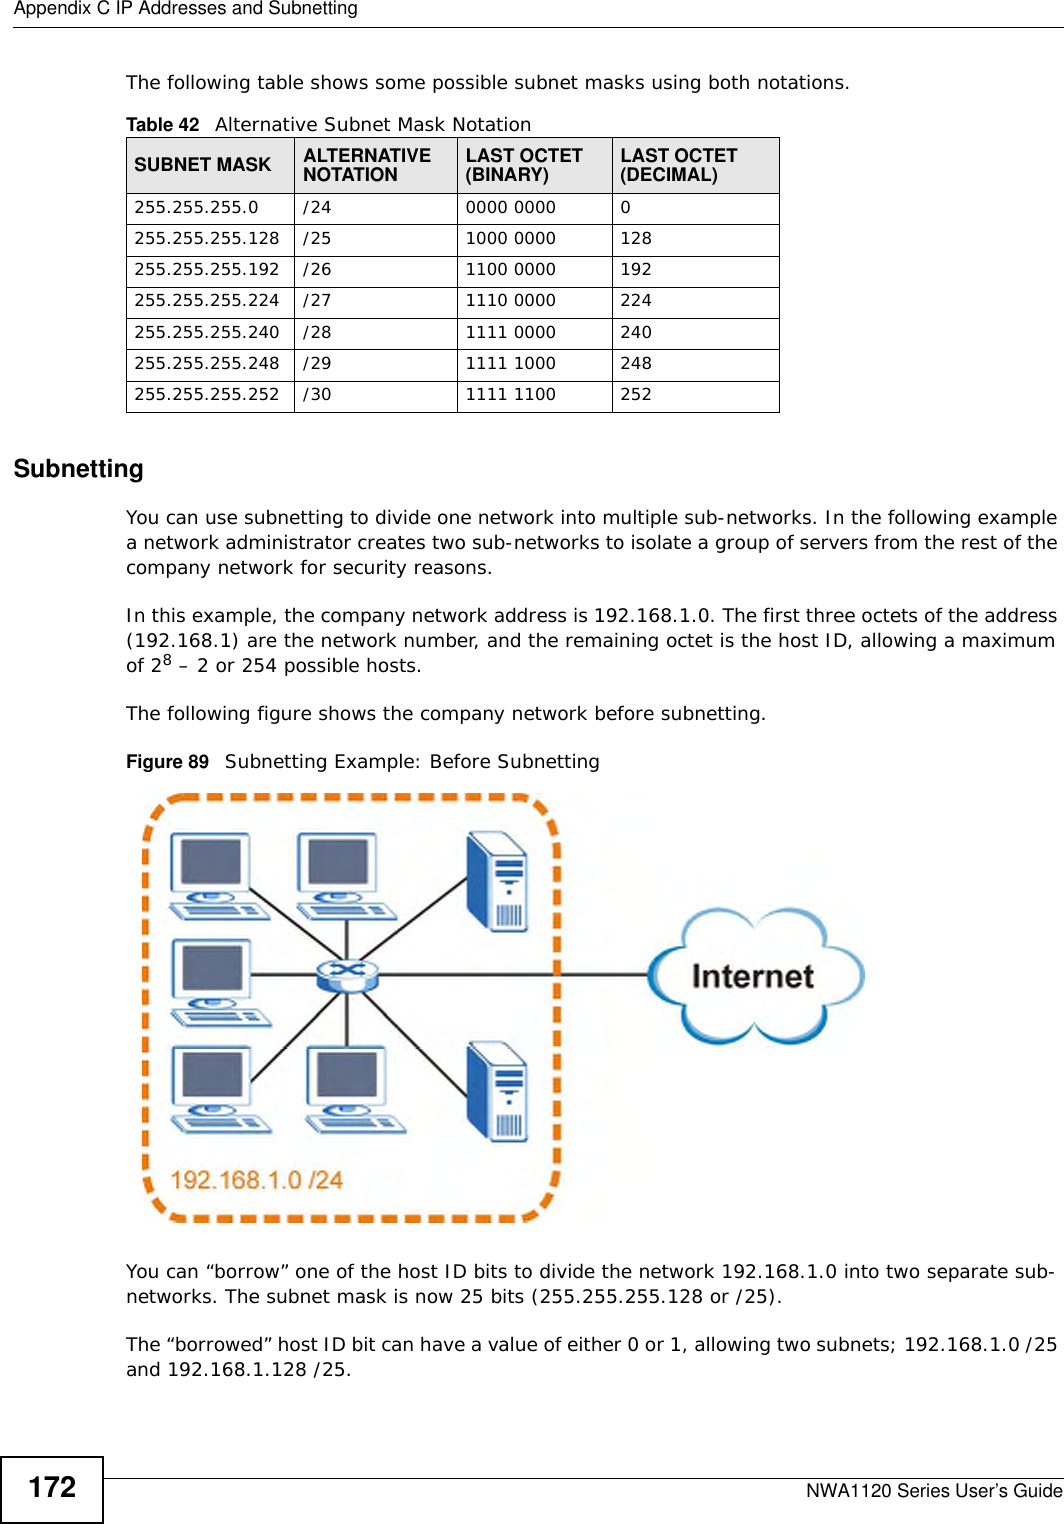 Appendix C IP Addresses and SubnettingNWA1120 Series User’s Guide172The following table shows some possible subnet masks using both notations. SubnettingYou can use subnetting to divide one network into multiple sub-networks. In the following example a network administrator creates two sub-networks to isolate a group of servers from the rest of the company network for security reasons.In this example, the company network address is 192.168.1.0. The first three octets of the address (192.168.1) are the network number, and the remaining octet is the host ID, allowing a maximum of 28 – 2 or 254 possible hosts.The following figure shows the company network before subnetting. Figure 89   Subnetting Example: Before SubnettingYou can “borrow” one of the host ID bits to divide the network 192.168.1.0 into two separate sub-networks. The subnet mask is now 25 bits (255.255.255.128 or /25).The “borrowed” host ID bit can have a value of either 0 or 1, allowing two subnets; 192.168.1.0 /25 and 192.168.1.128 /25. Table 42   Alternative Subnet Mask NotationSUBNET MASK ALTERNATIVE NOTATION LAST OCTET (BINARY) LAST OCTET (DECIMAL)255.255.255.0 /24 0000 0000 0255.255.255.128 /25 1000 0000 128255.255.255.192 /26 1100 0000 192255.255.255.224 /27 1110 0000 224255.255.255.240 /28 1111 0000 240255.255.255.248 /29 1111 1000 248255.255.255.252 /30 1111 1100 252